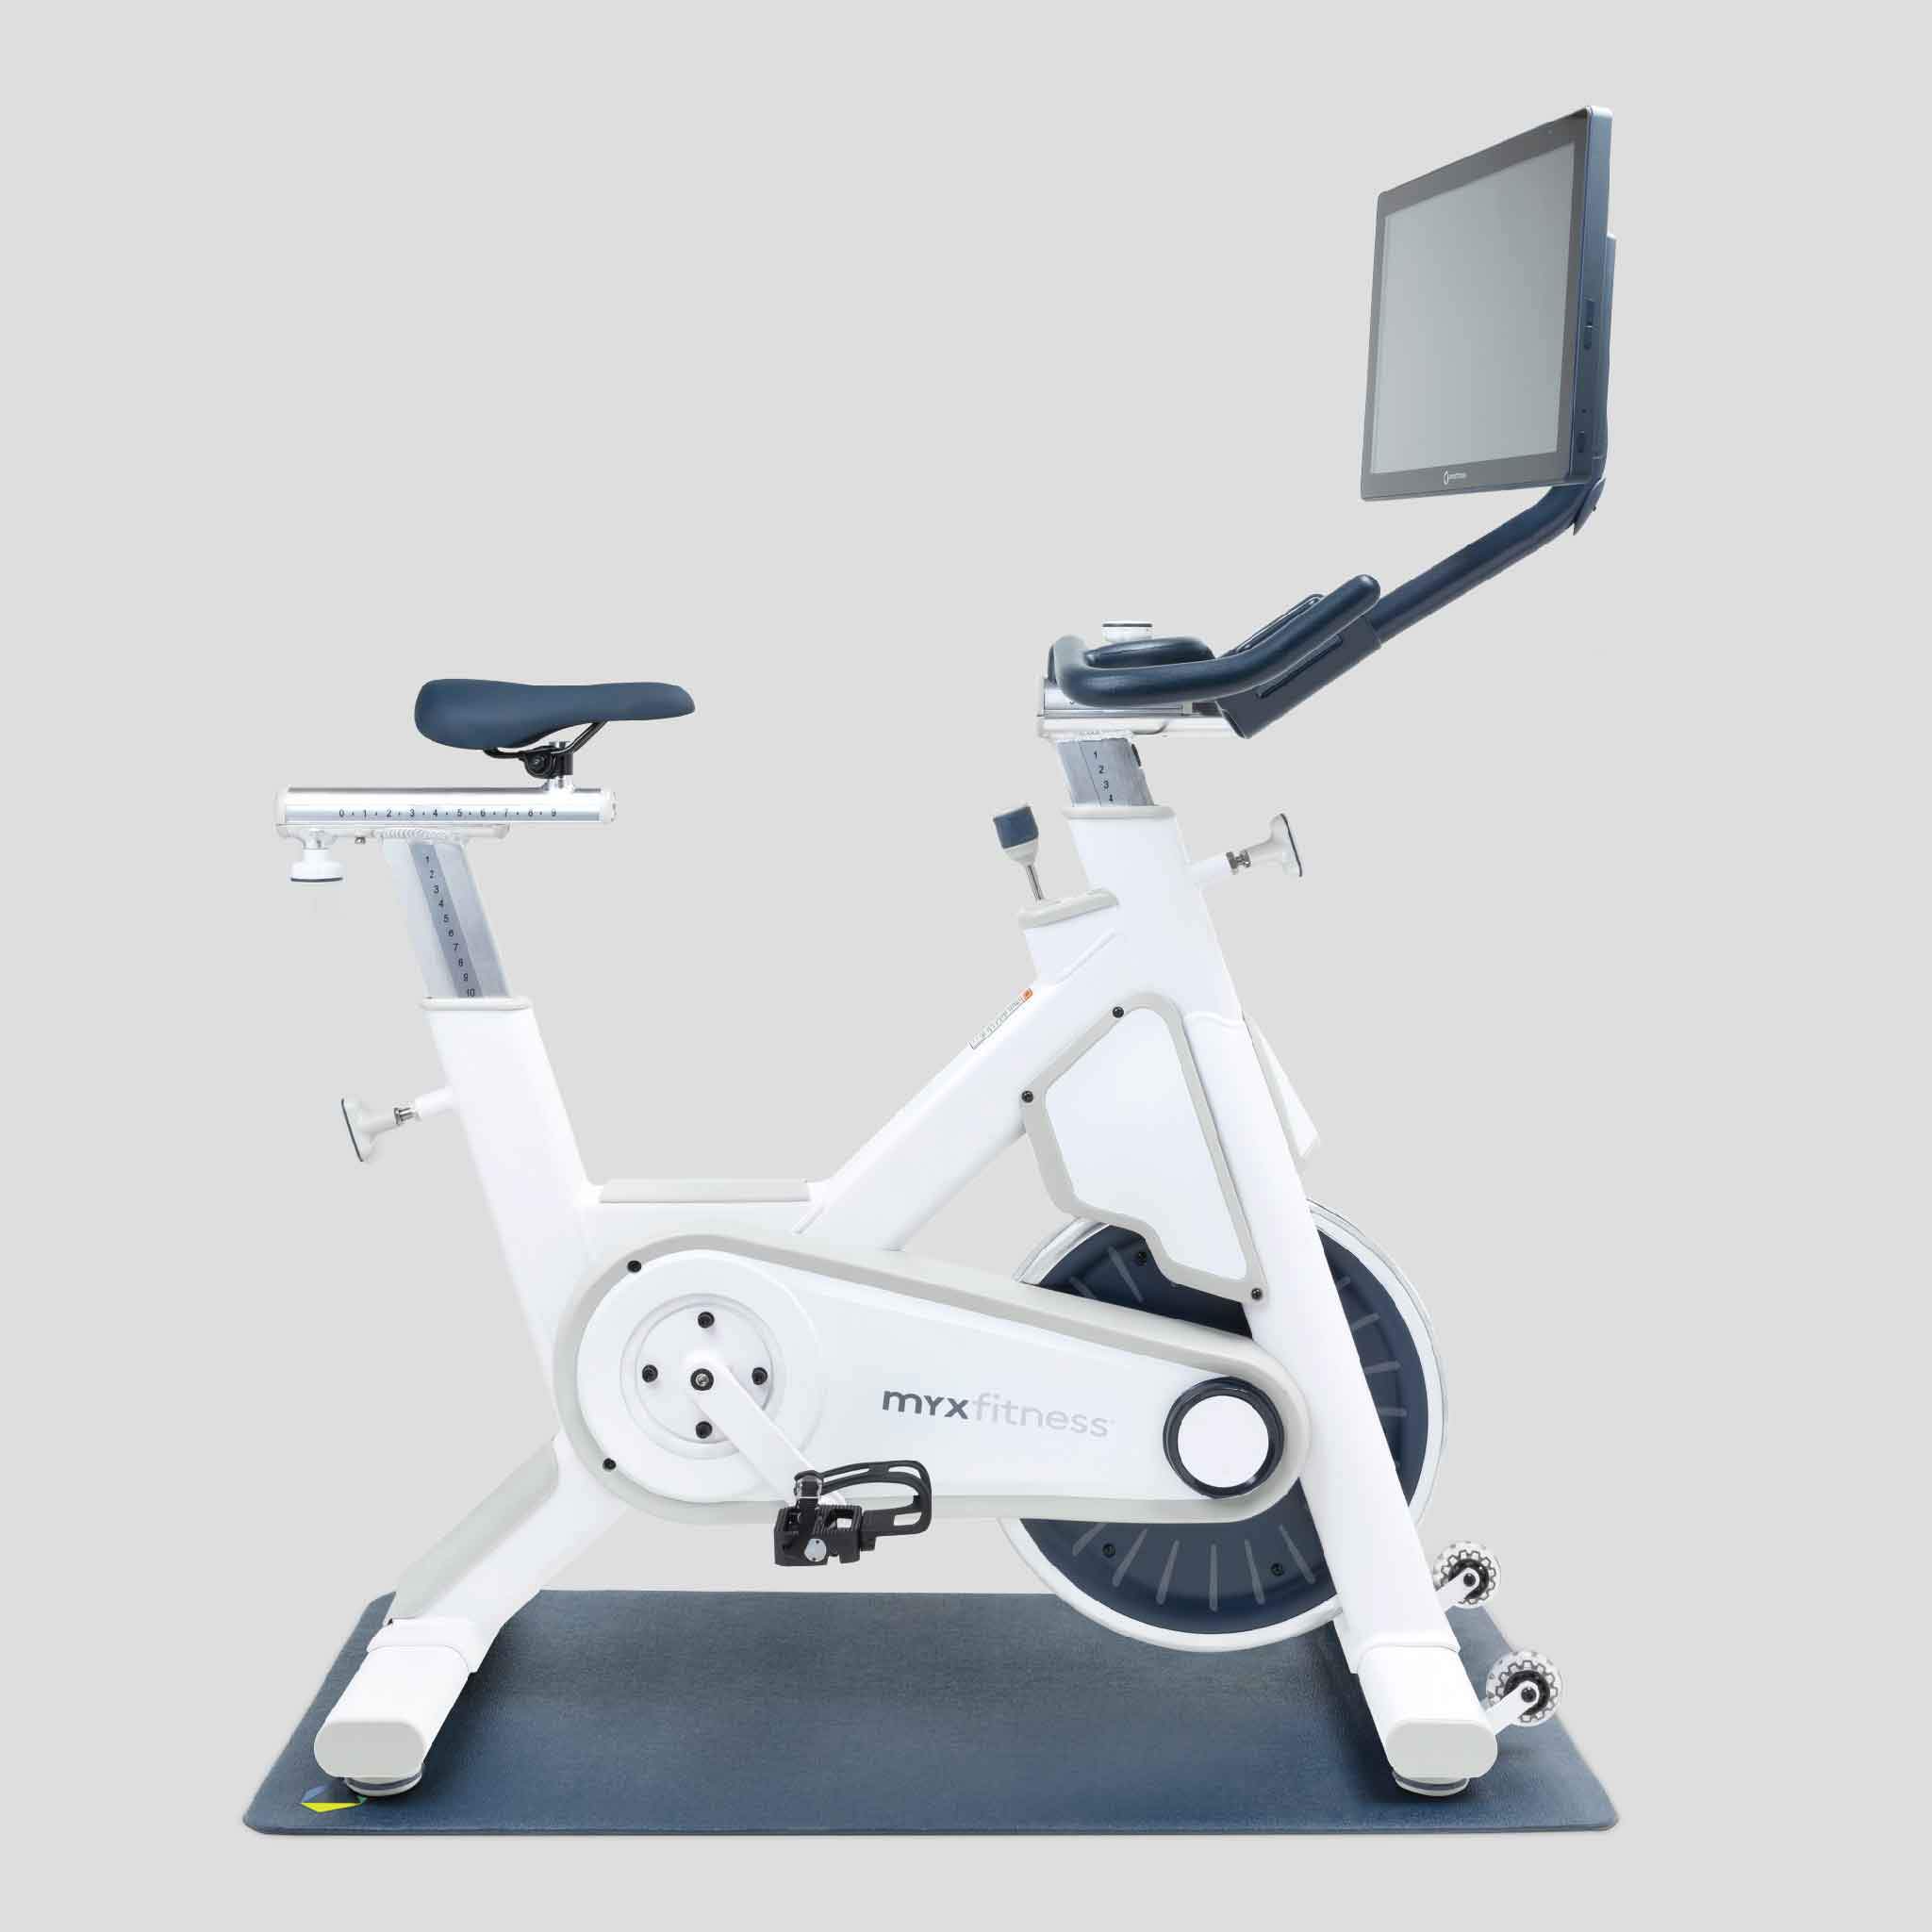 15 Minute Myx Fitness Bike Available In Canada for Push Pull Legs